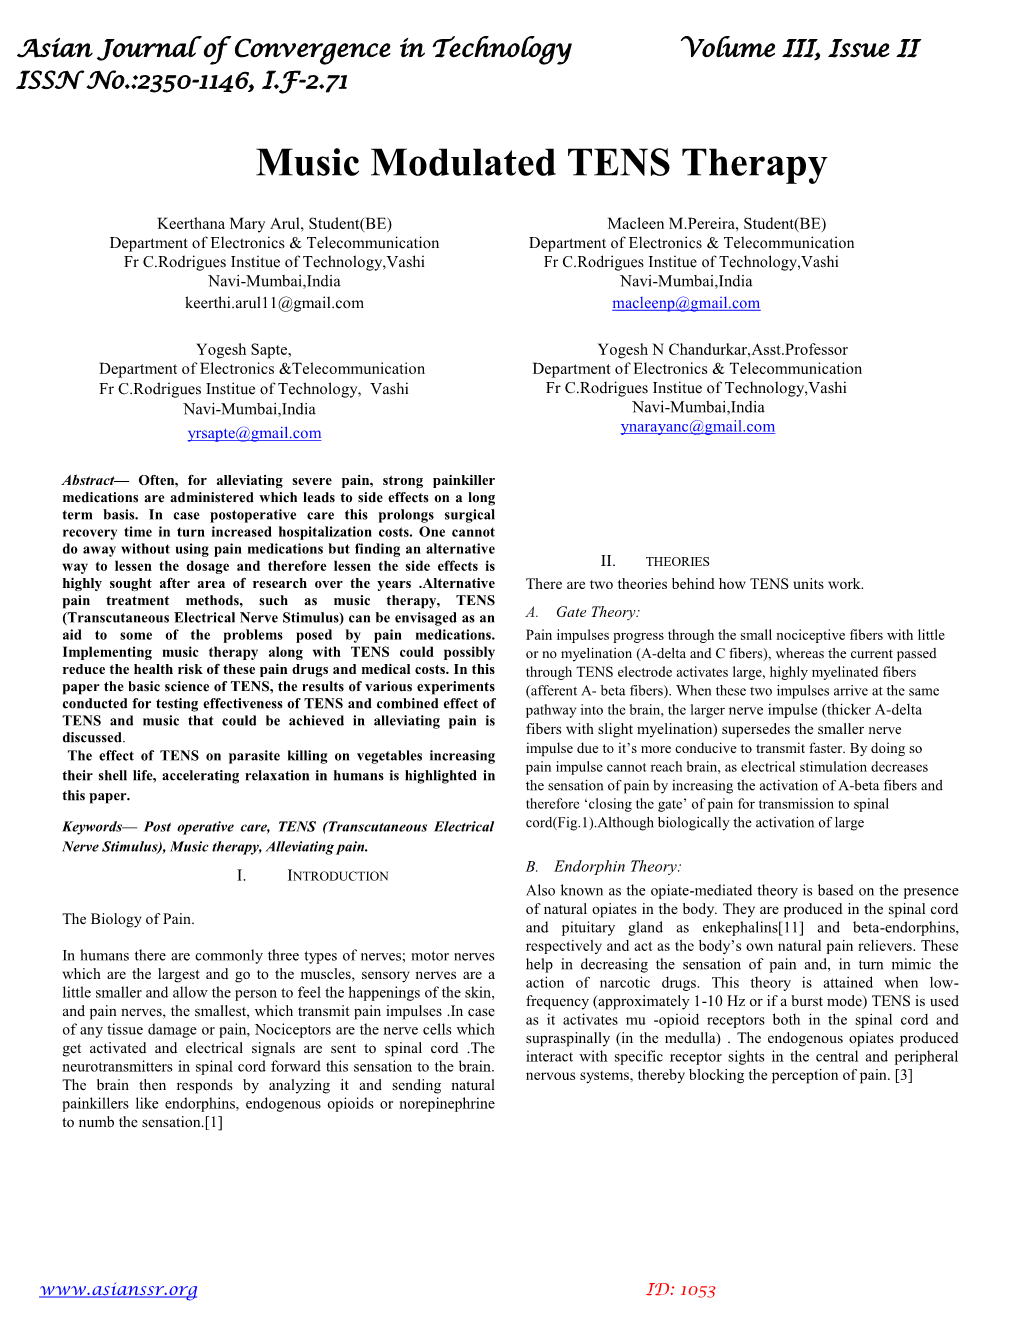 Music Modulated TENS Therapy